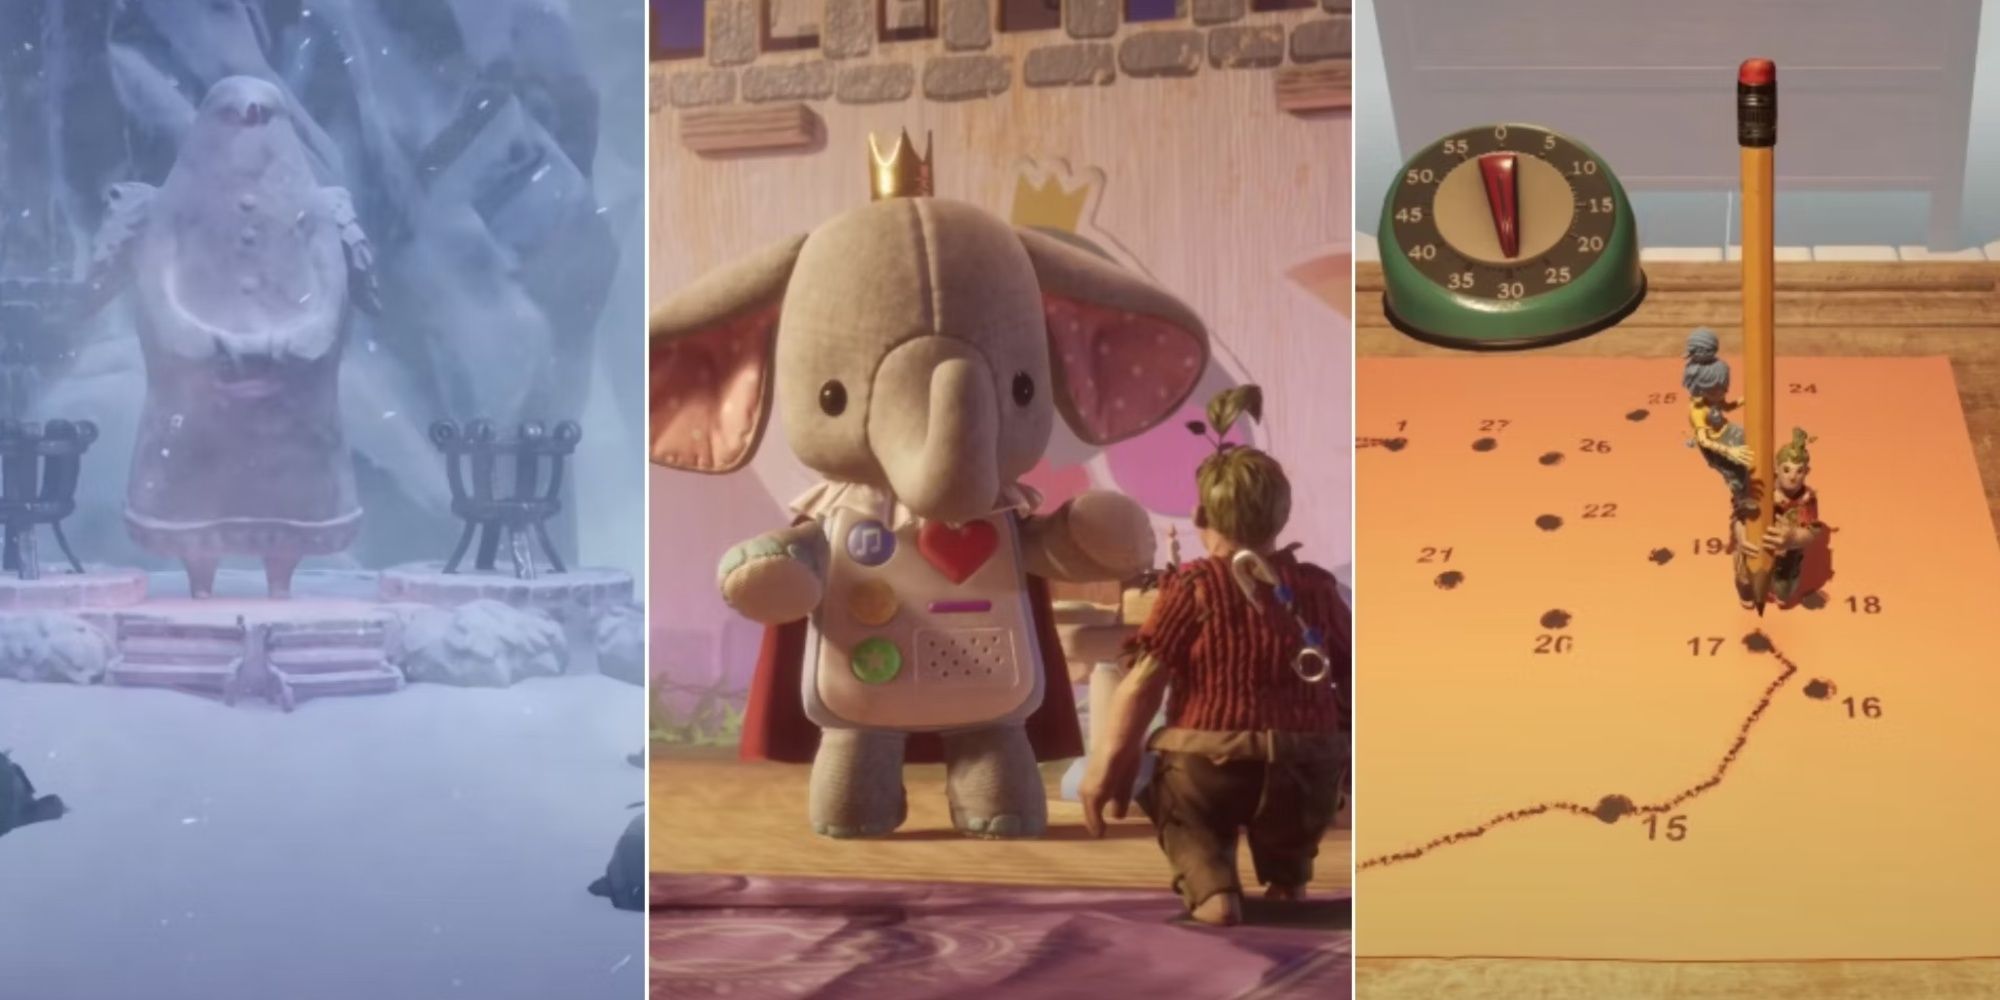 Screenshots From It Takes Two Game Play Showing The Snow Globe Level, Cutie The Elephant and Cody and May and Cody Completing The Dot-To-Dot Puzzle.